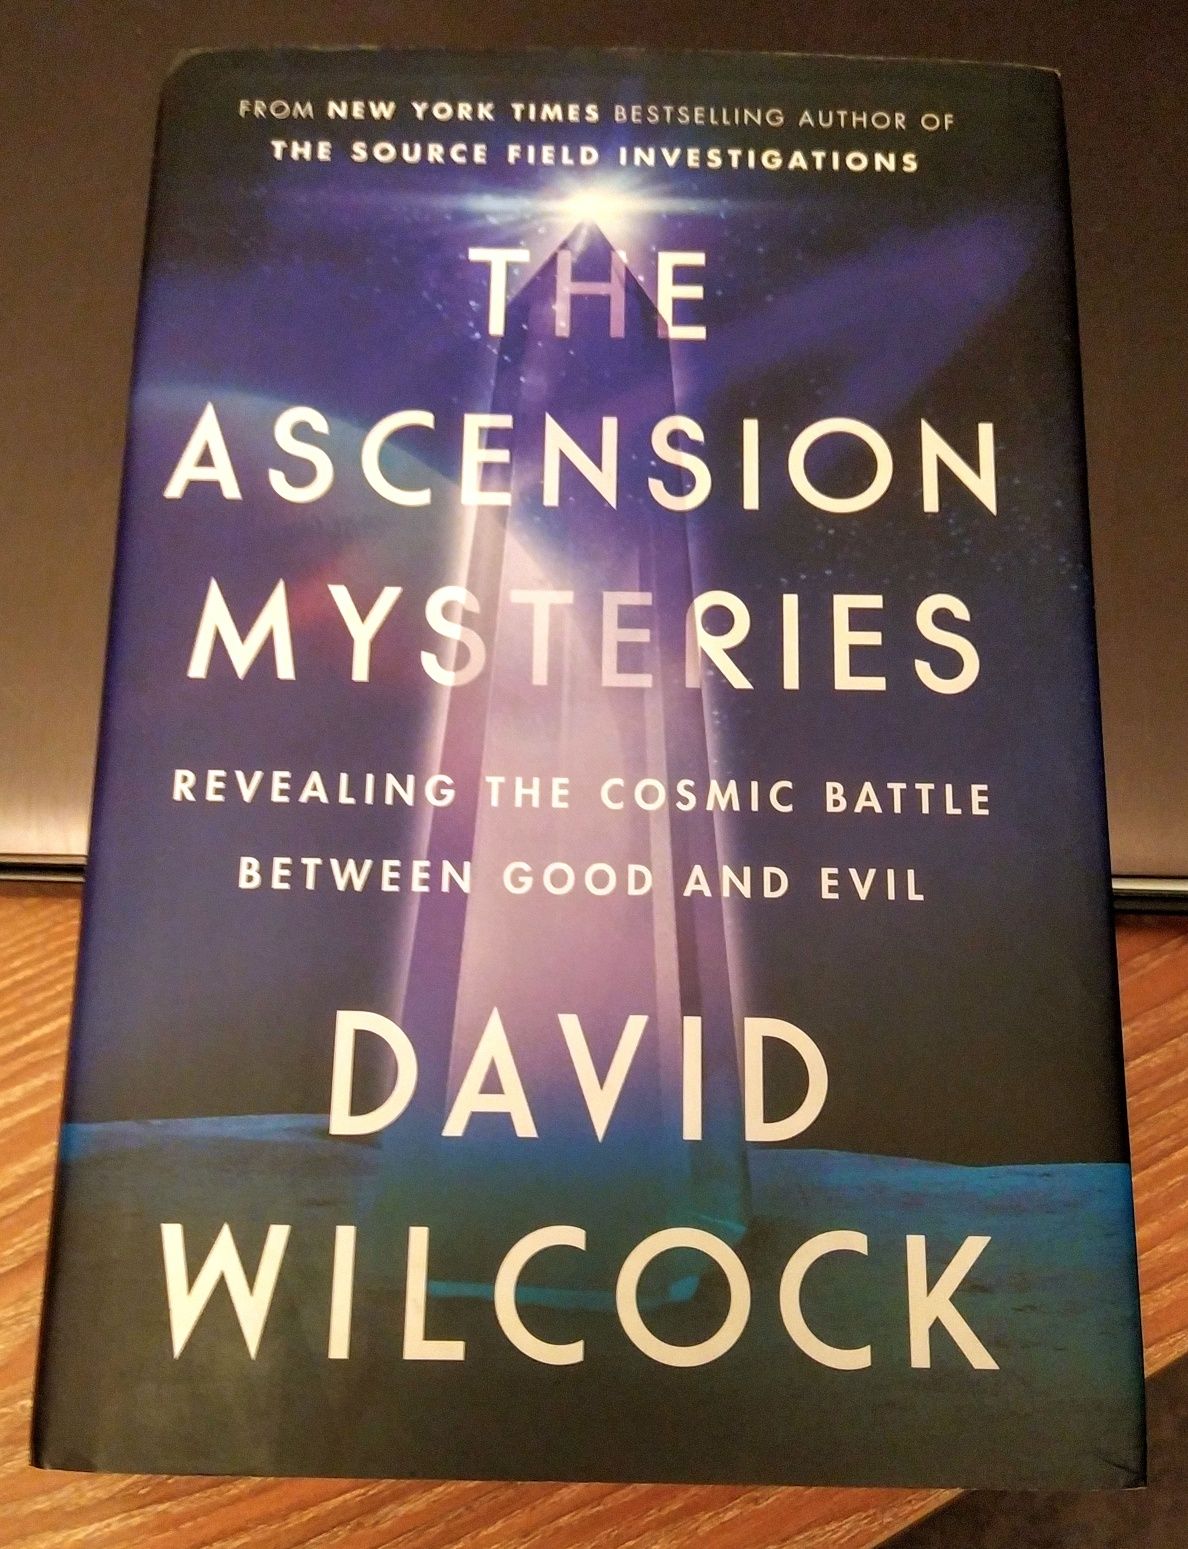 The Ascension Mysteries (David Wilcock)